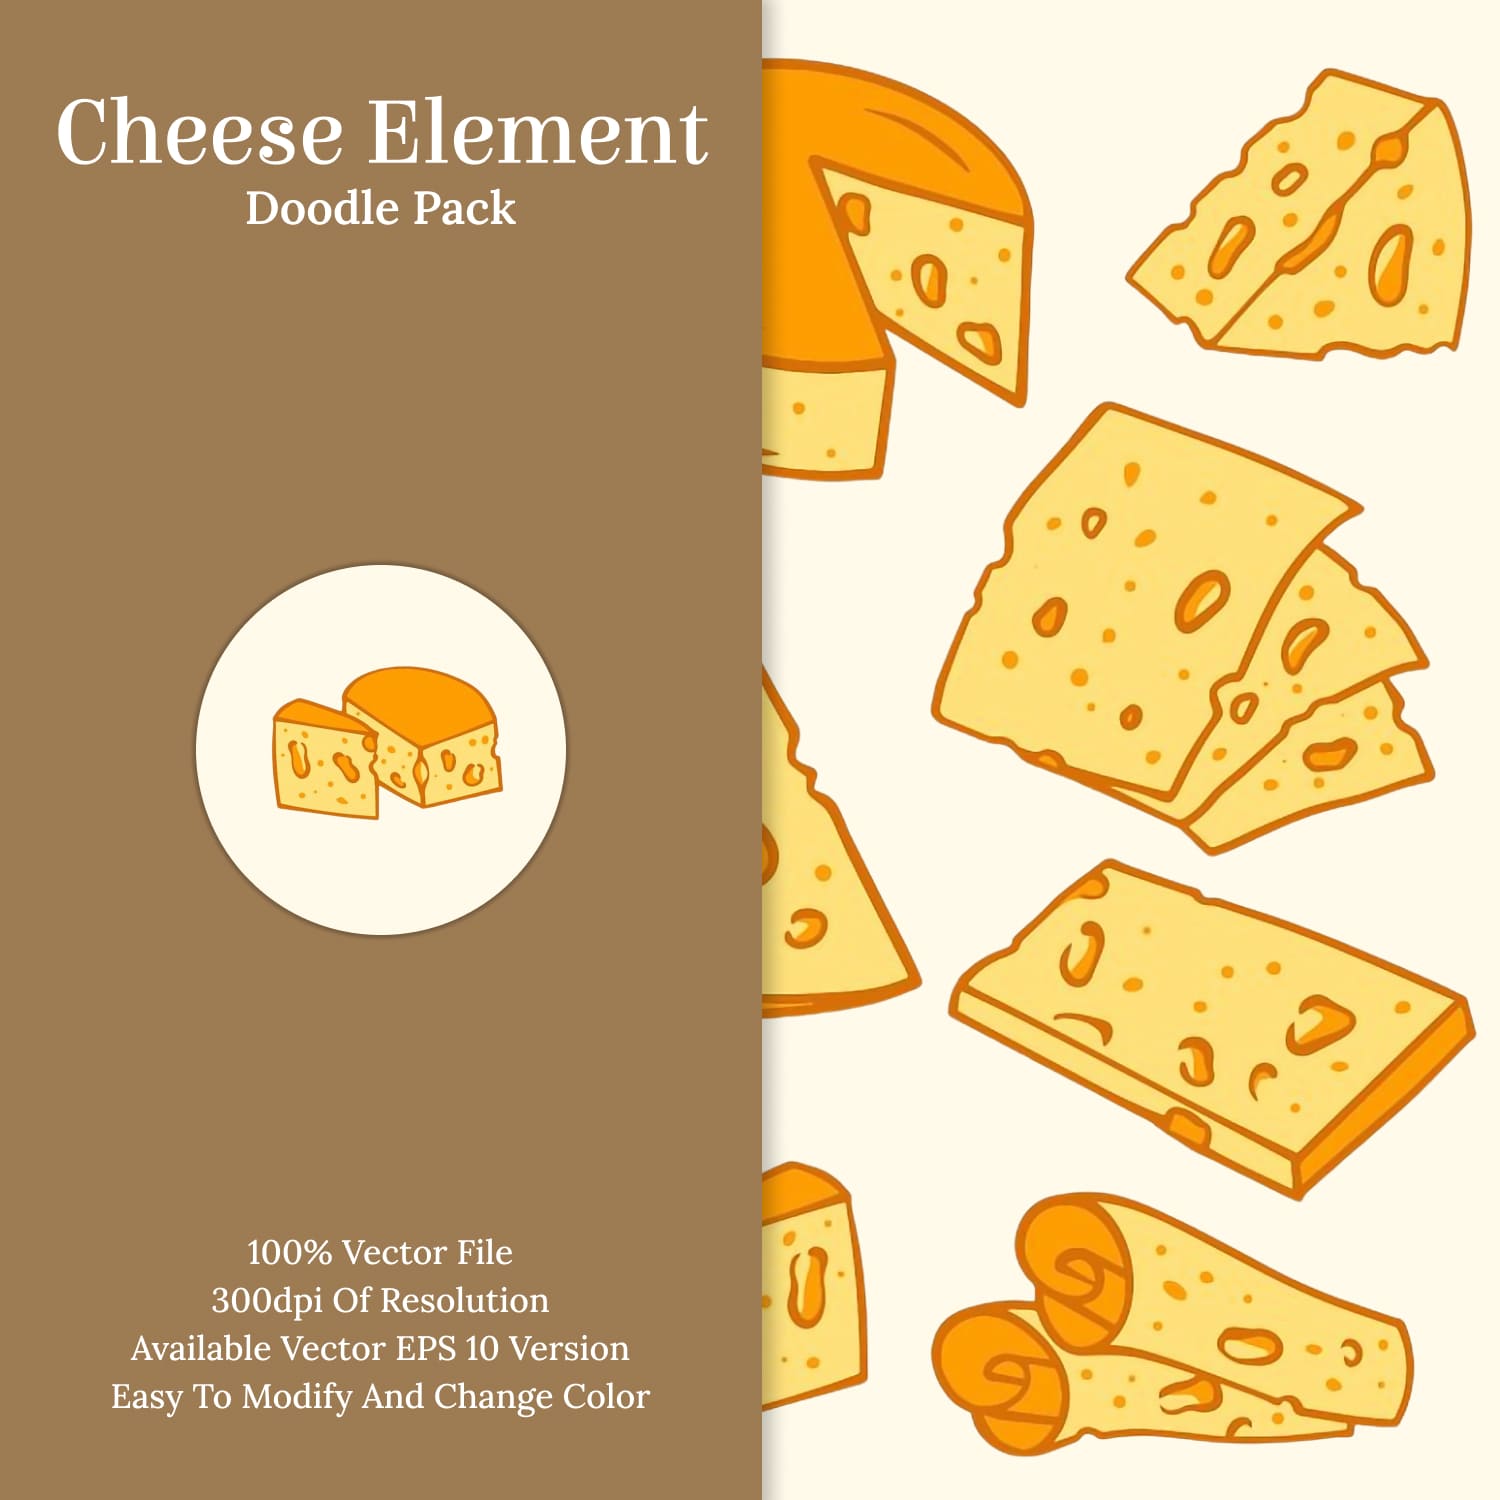 Cheese element doodle pack - main image preview.